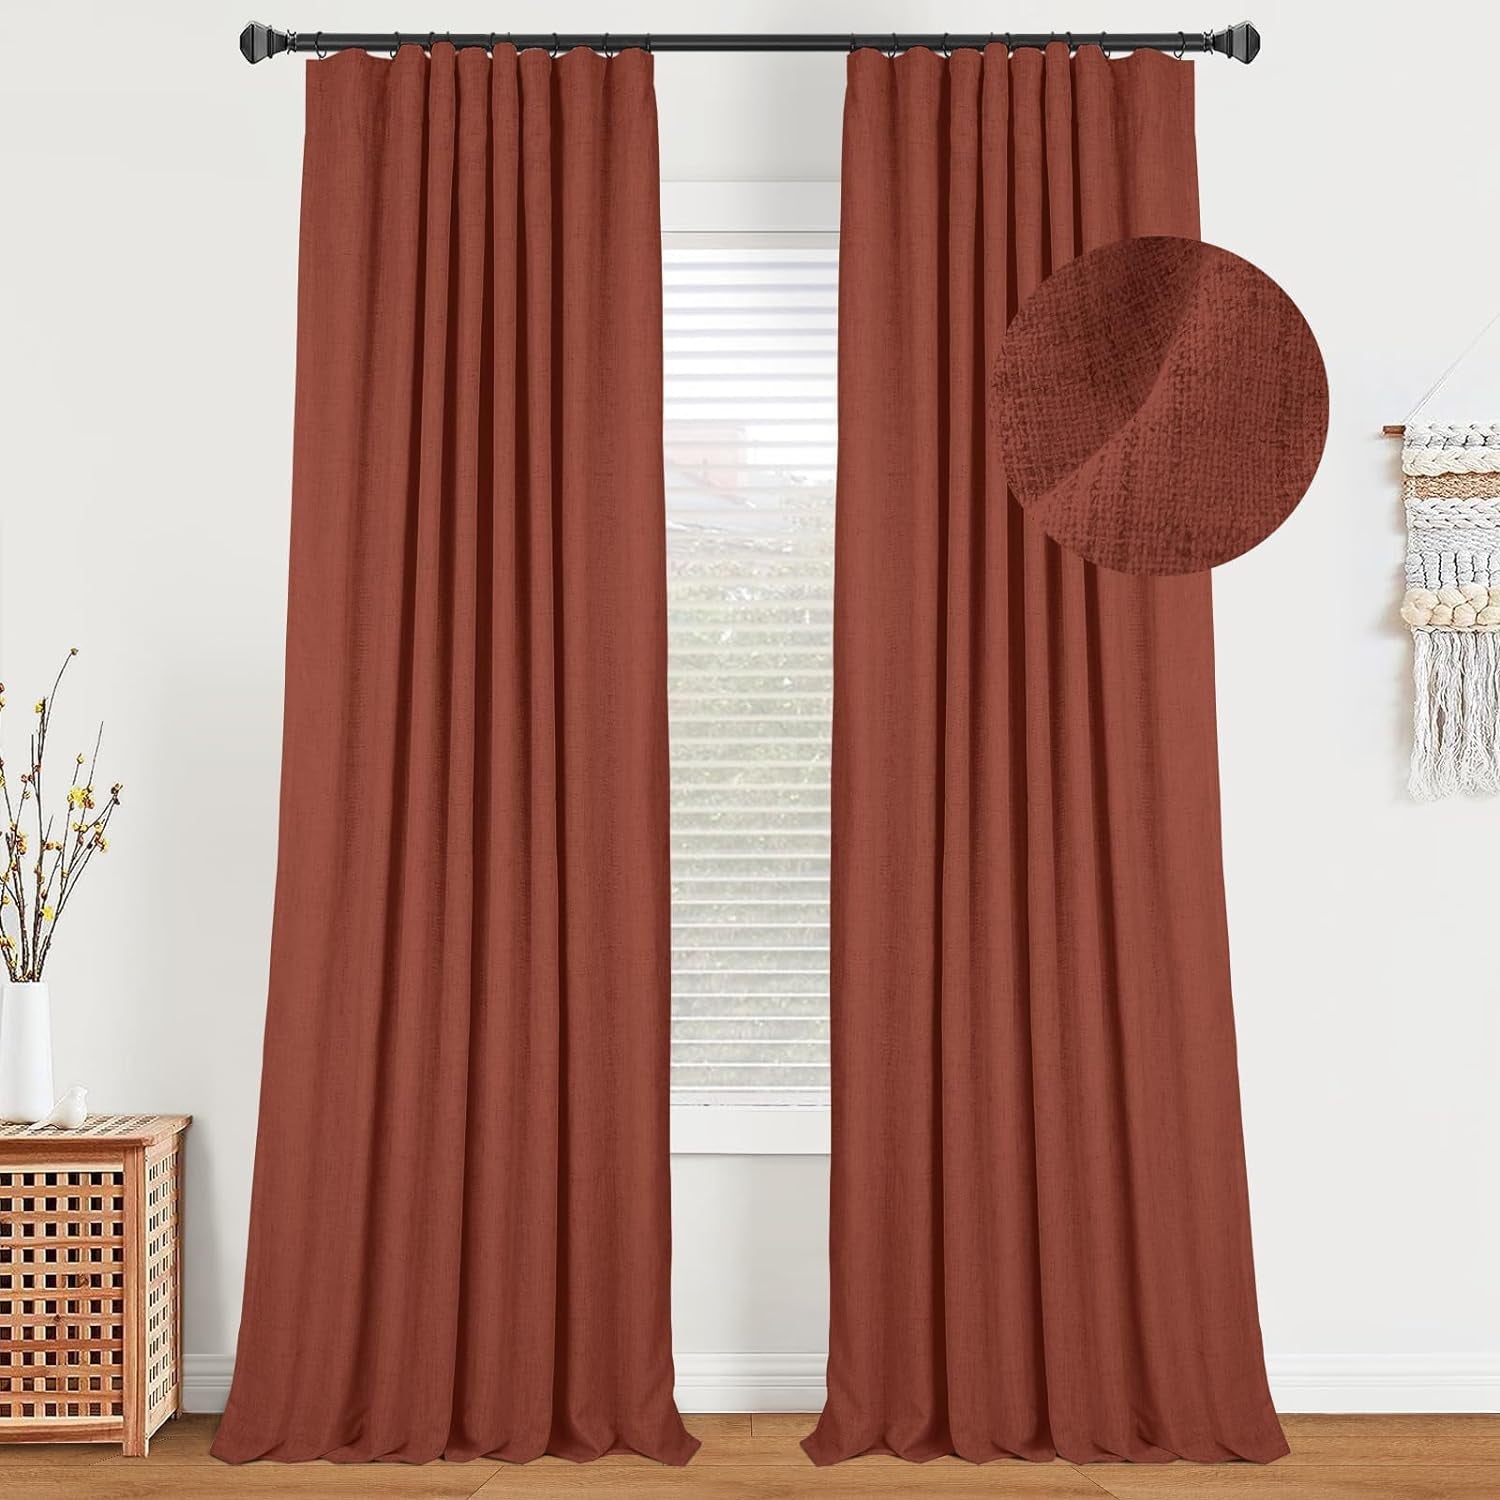 Zeerobee 100% Black Out Curtains for Bedroom Windows 84 Linen Blackout Curtains 84 Inch Length 2 Panels Set, Thermal Insulated Black Out Curtains & Drapes, W50 X L84, Beige  zeerobee 25 Terracotta 50"W X 108"L 